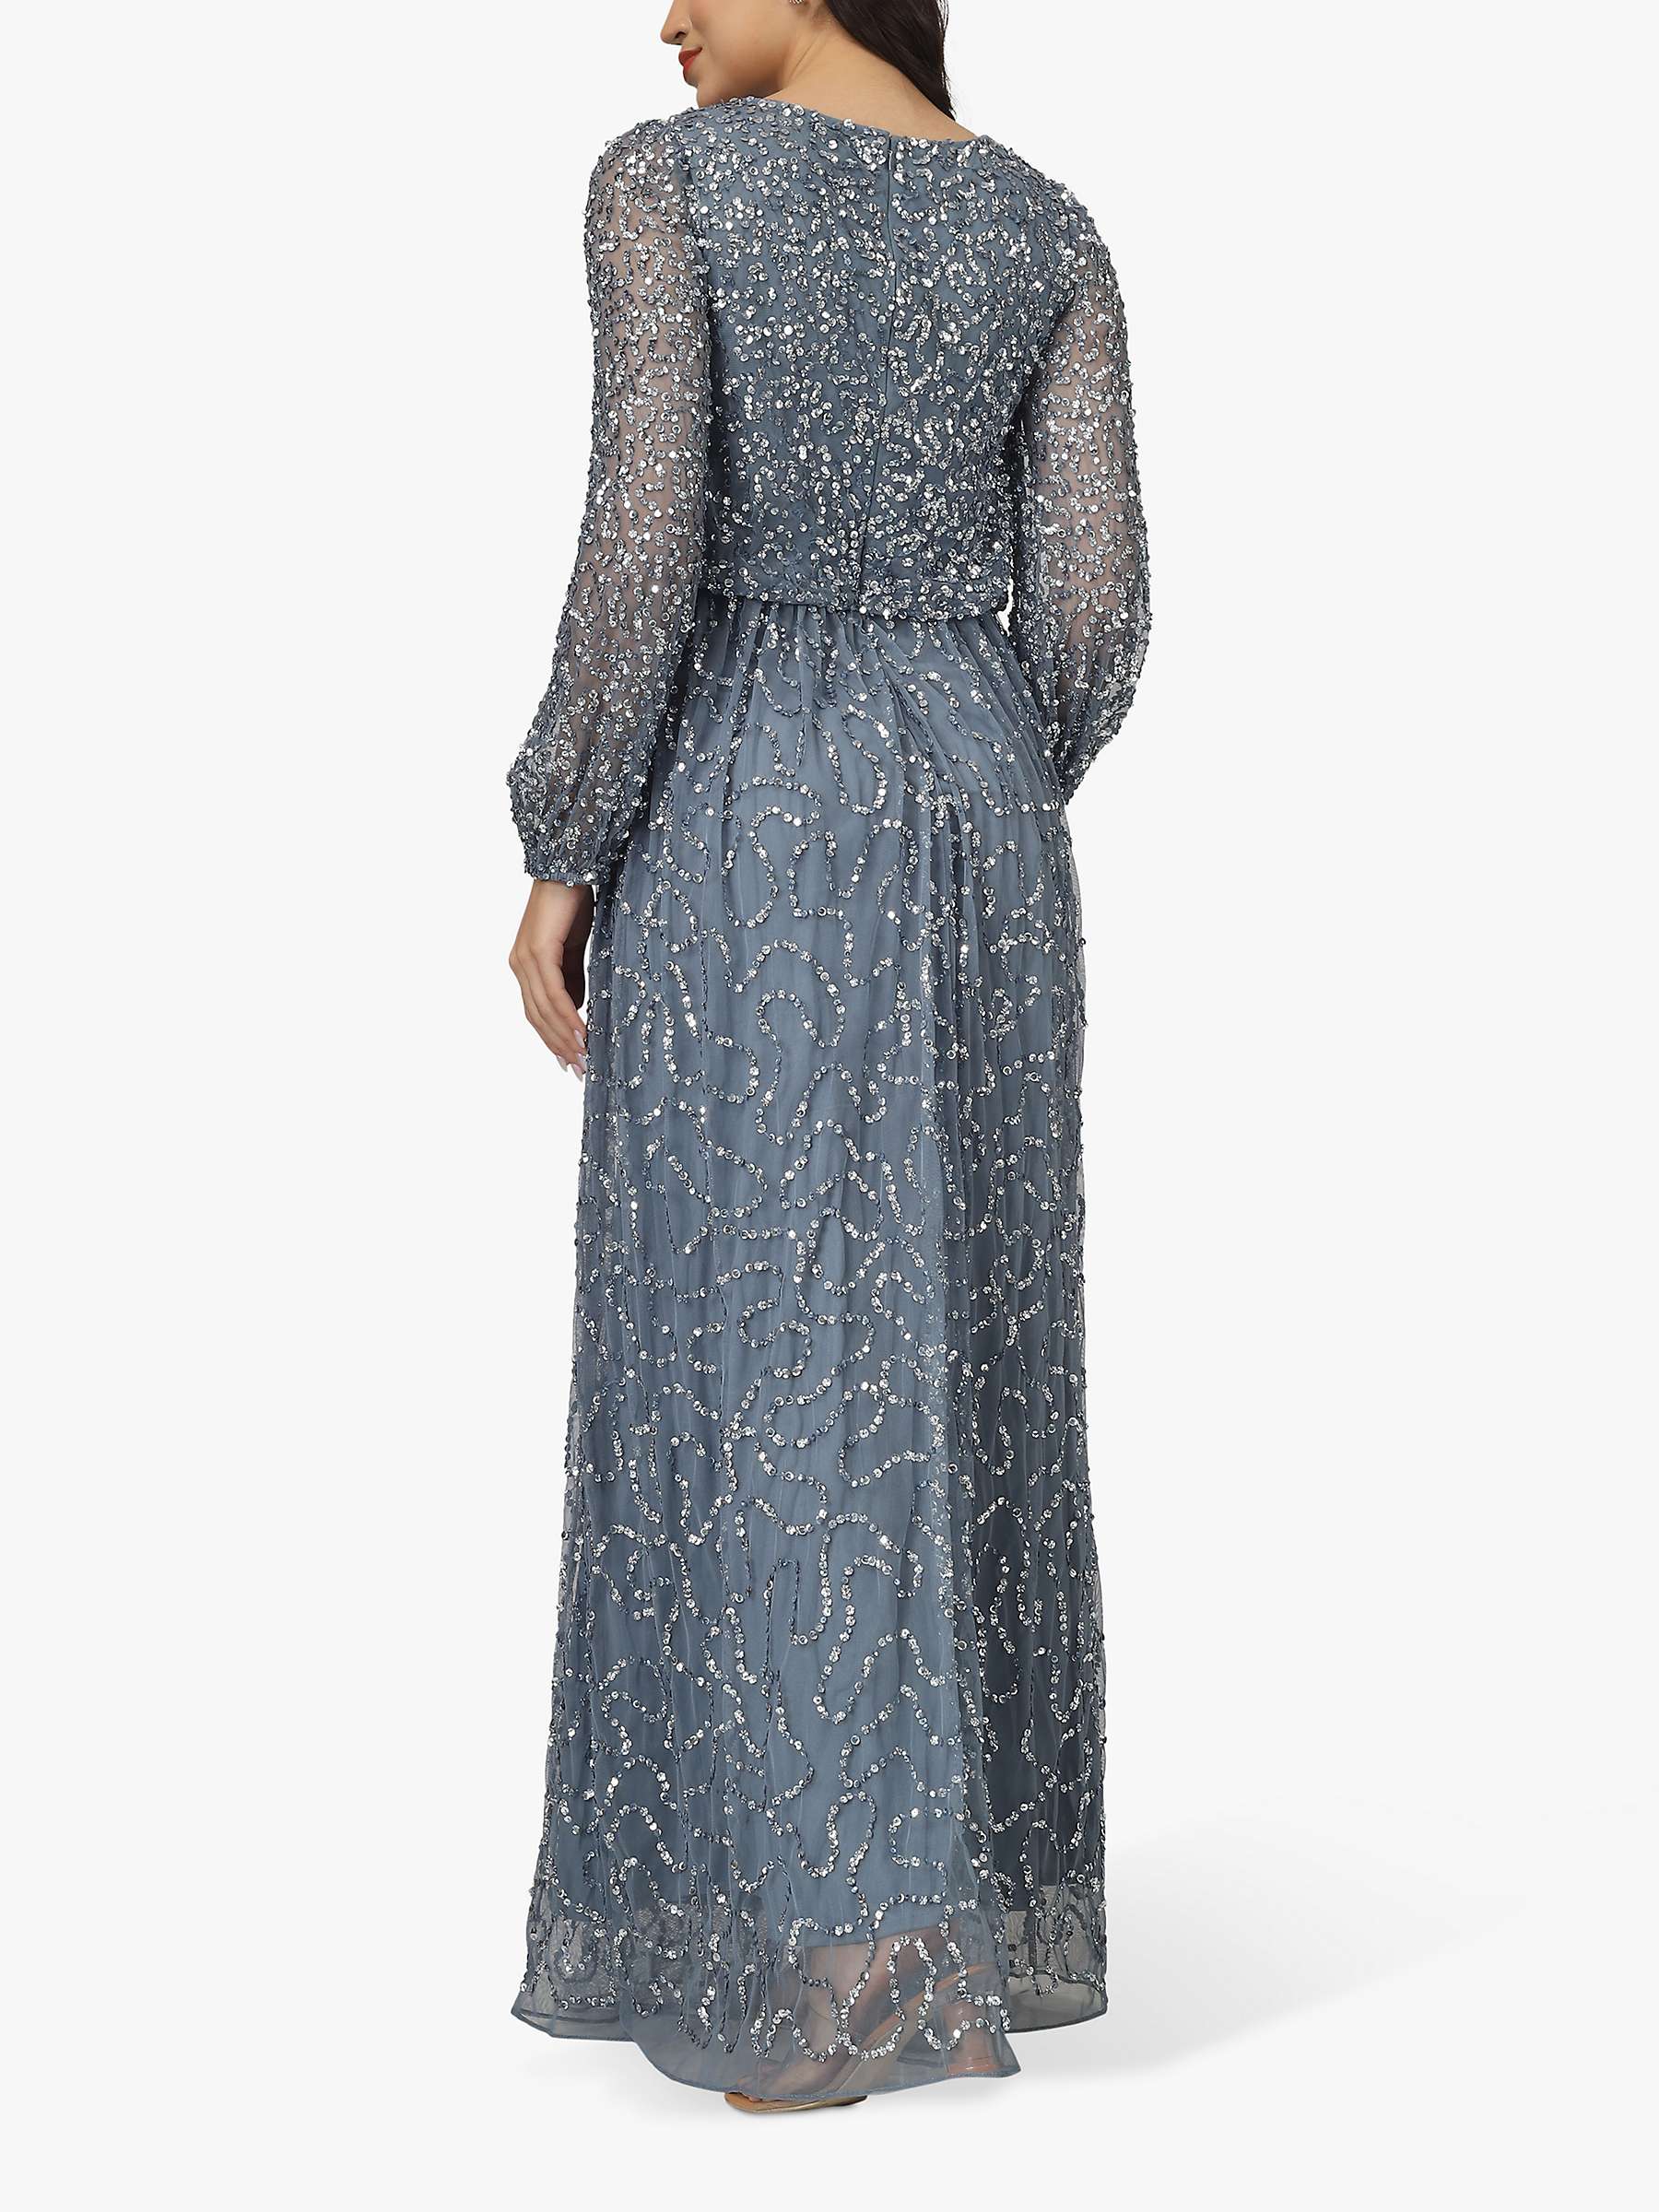 Buy Lace & Beads Melissa Embellished Maxi Dress, Dusty Blue Online at johnlewis.com